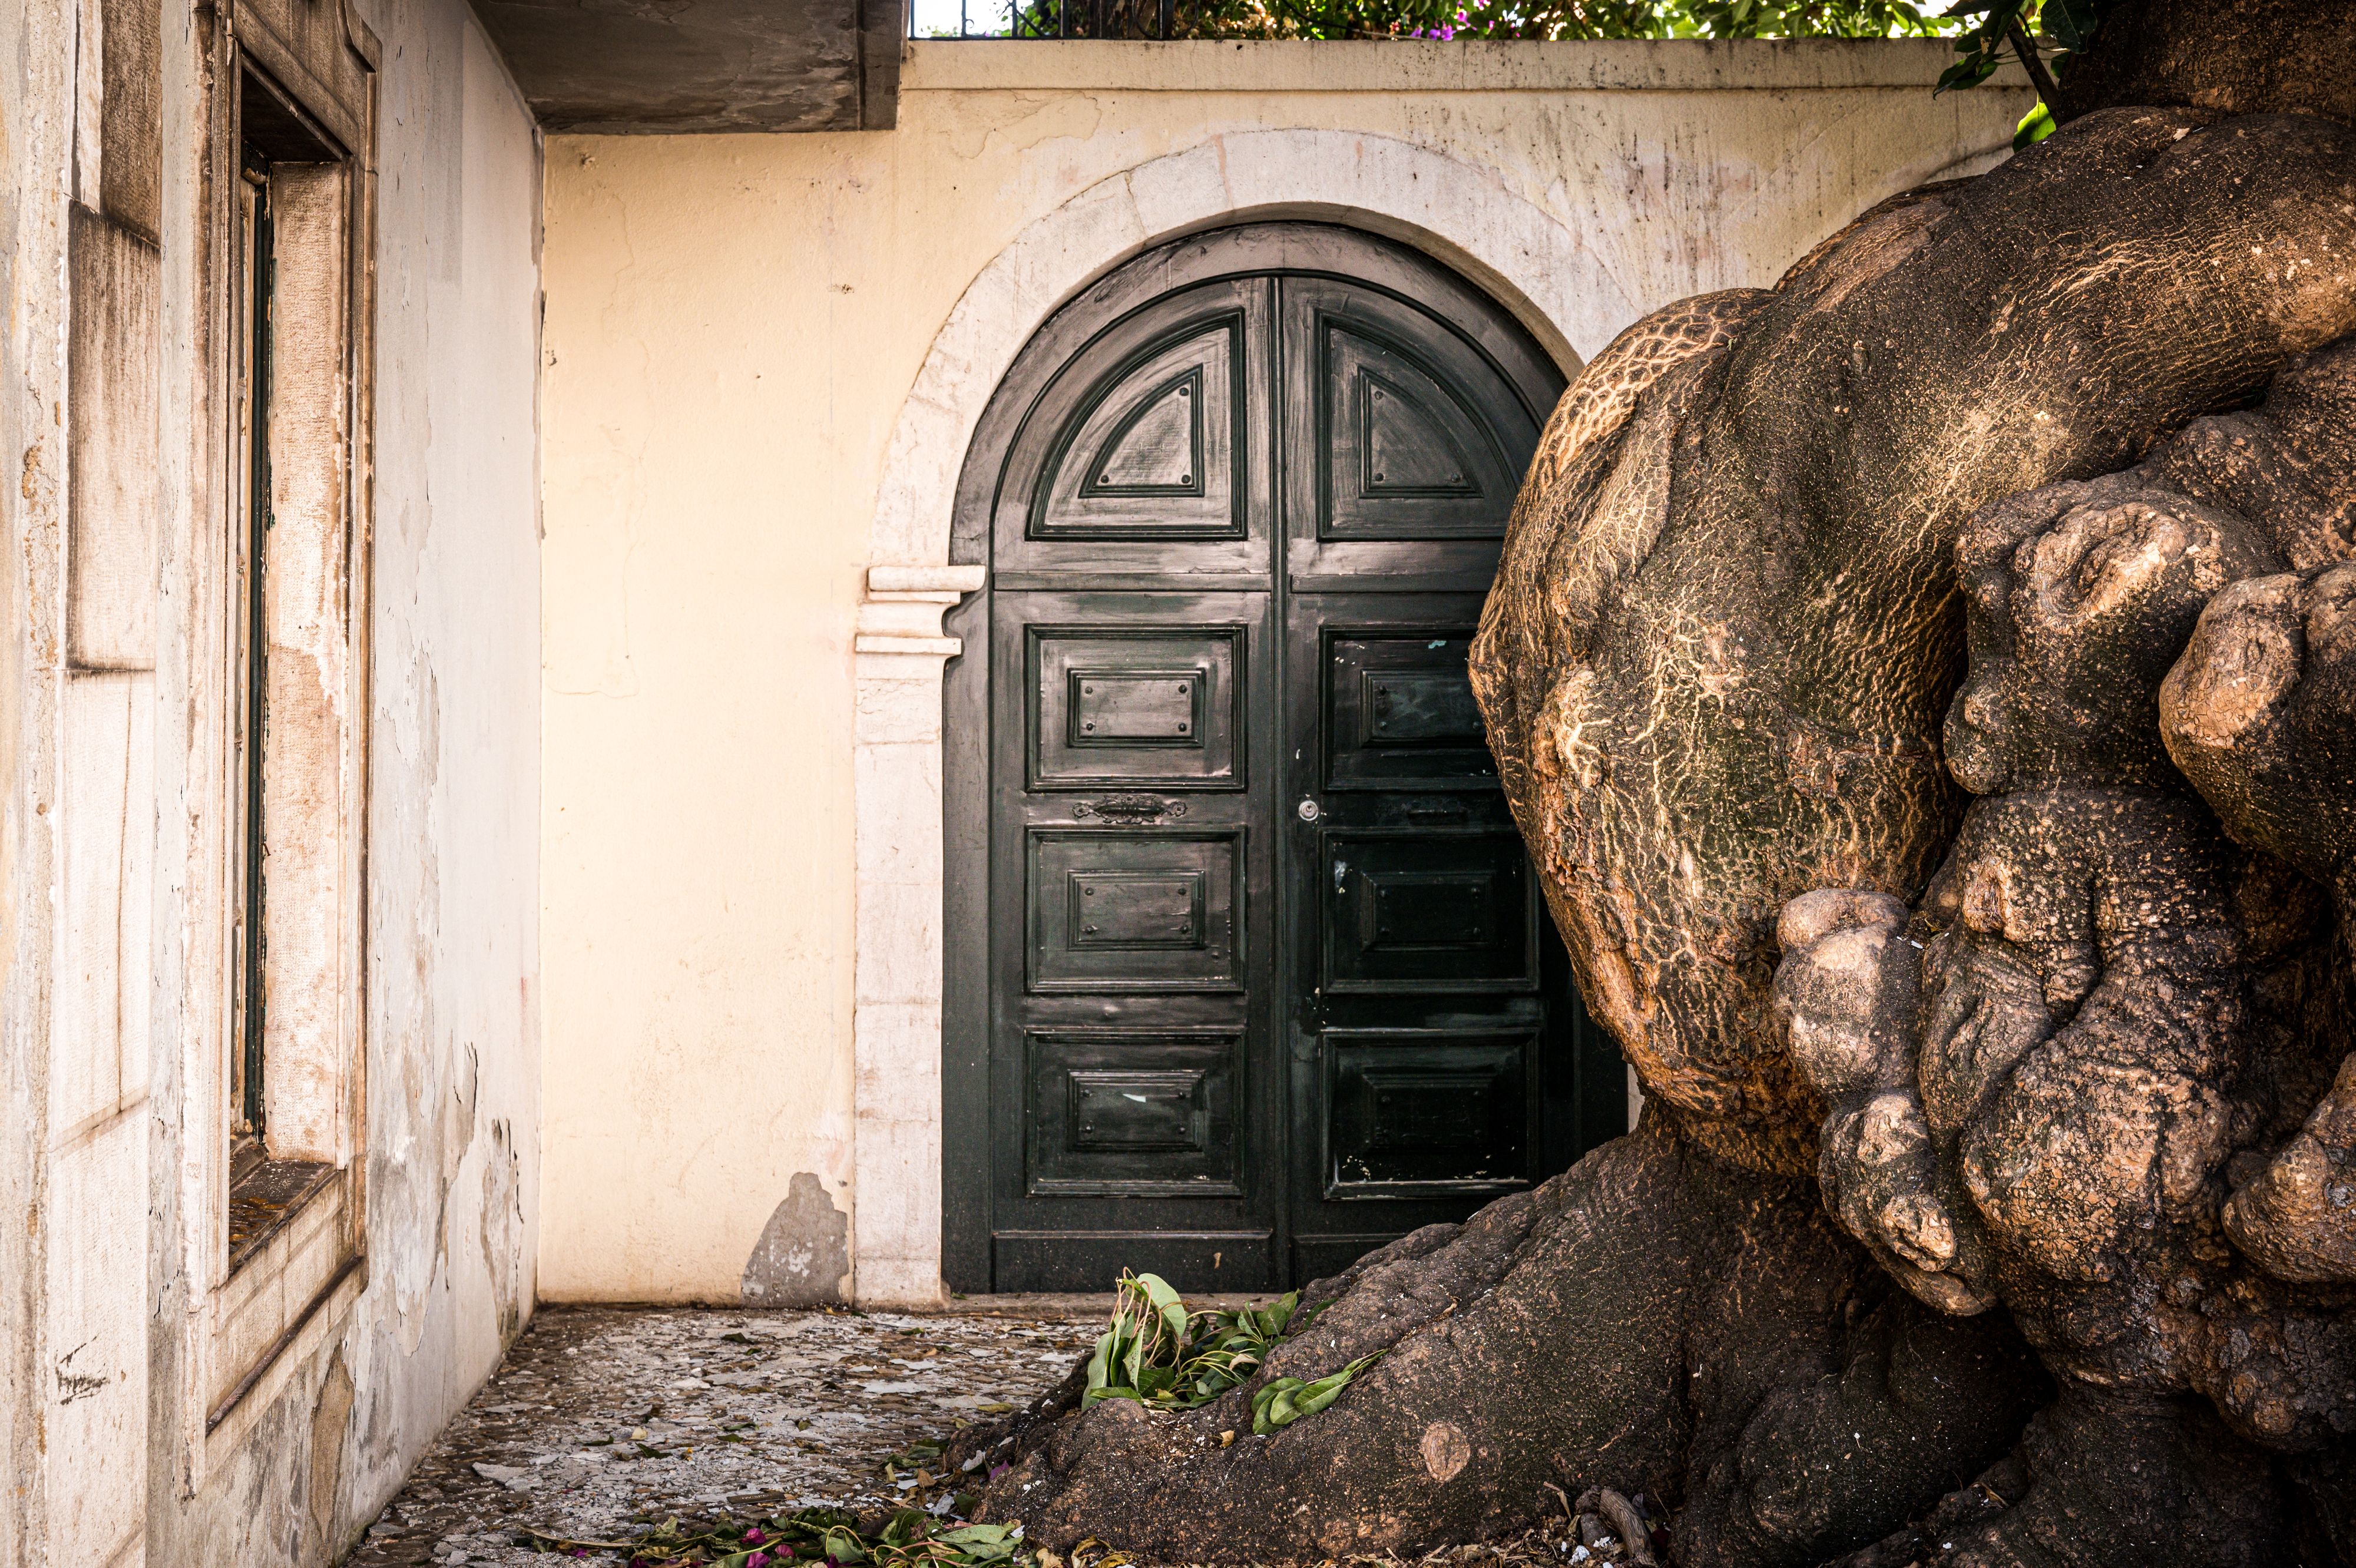 Large old tree protrudes in front of funky old doorway in Lisbon, Portugal